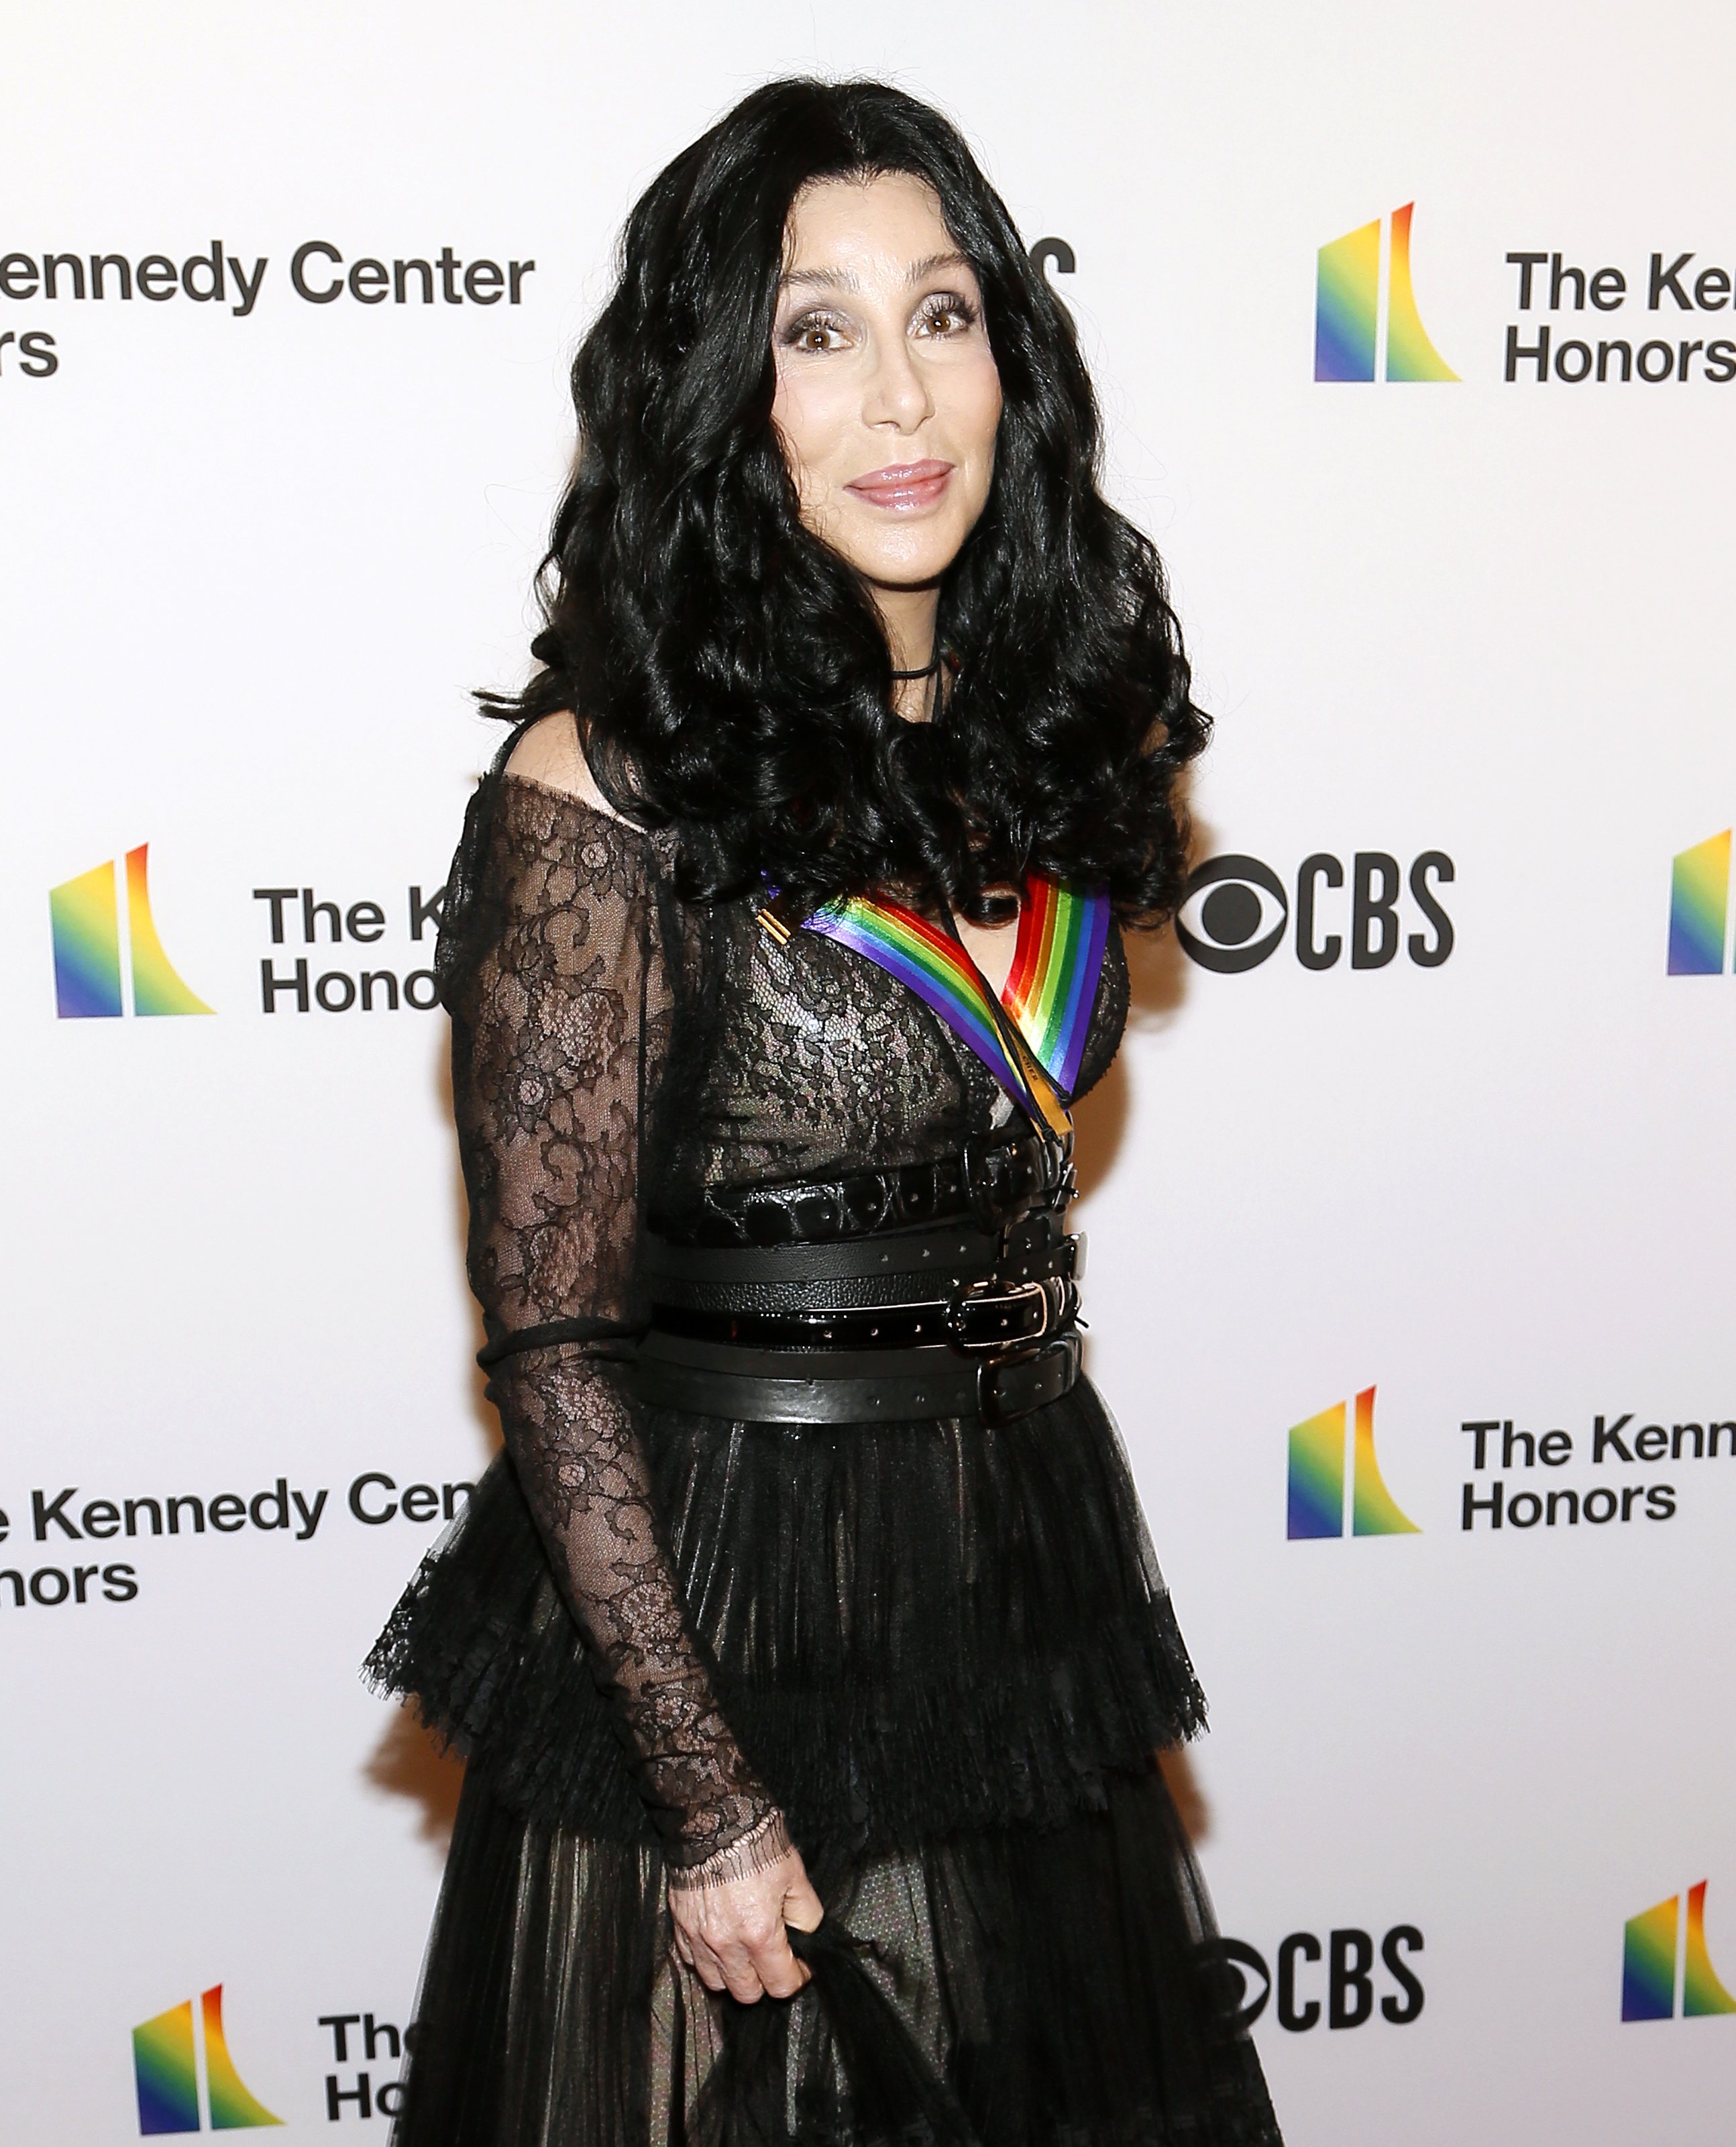 Cher arrives at the 2018 Kennedy Center Honors on December 02, 2018, in Washington, DC. | Source: Getty Images.